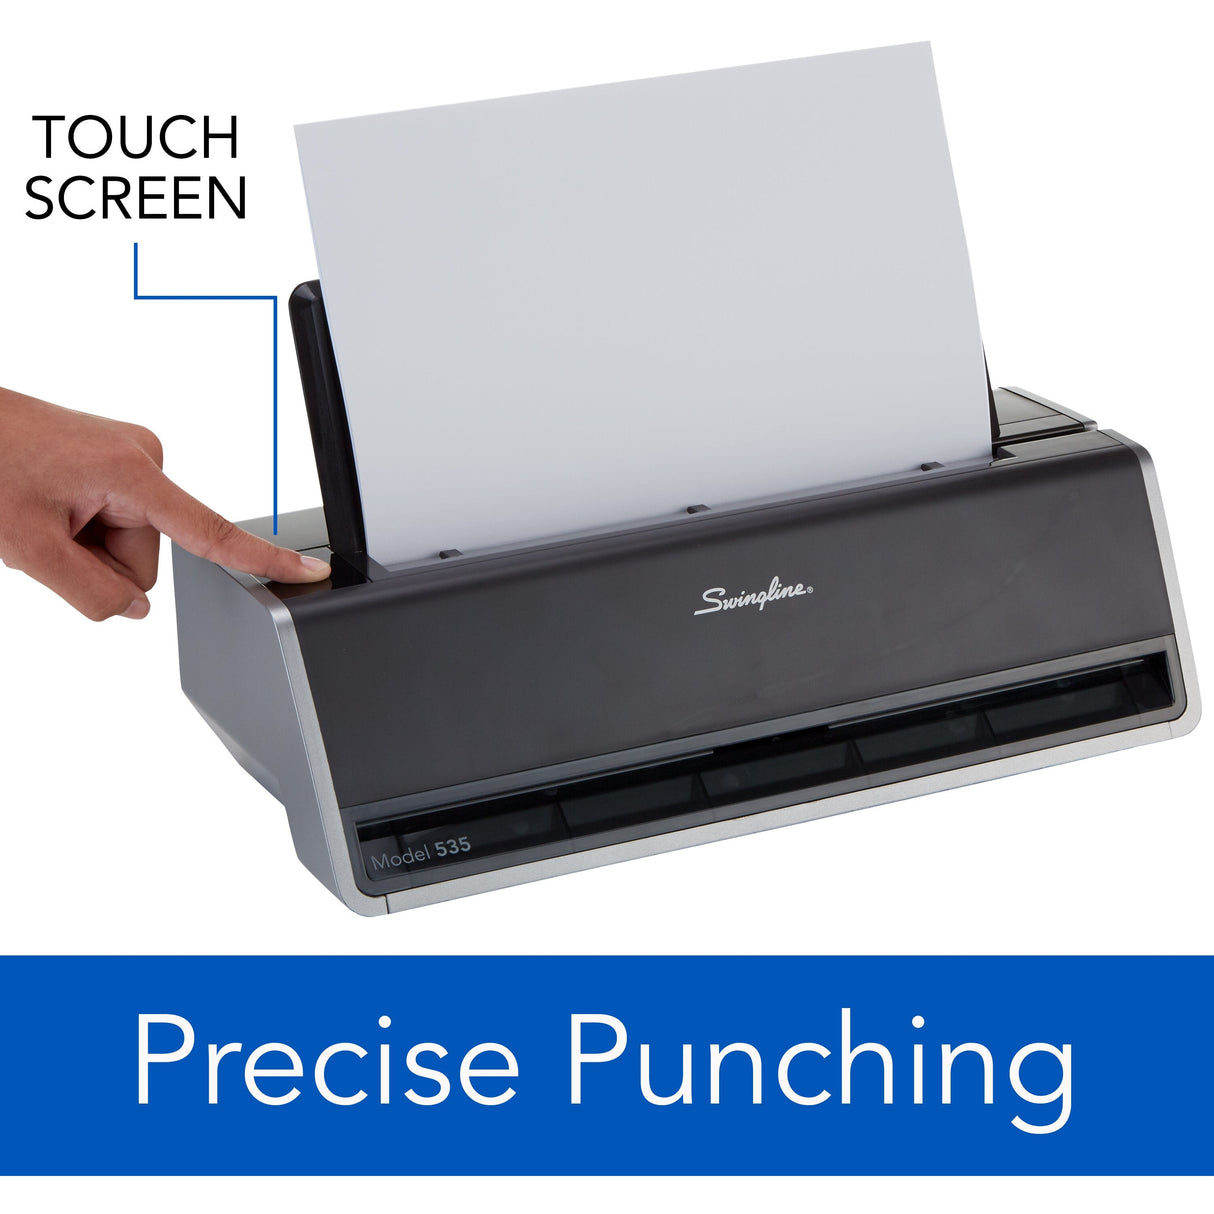 Swingline Electric Punch, Model 3H-28S, 3-Hole Punch